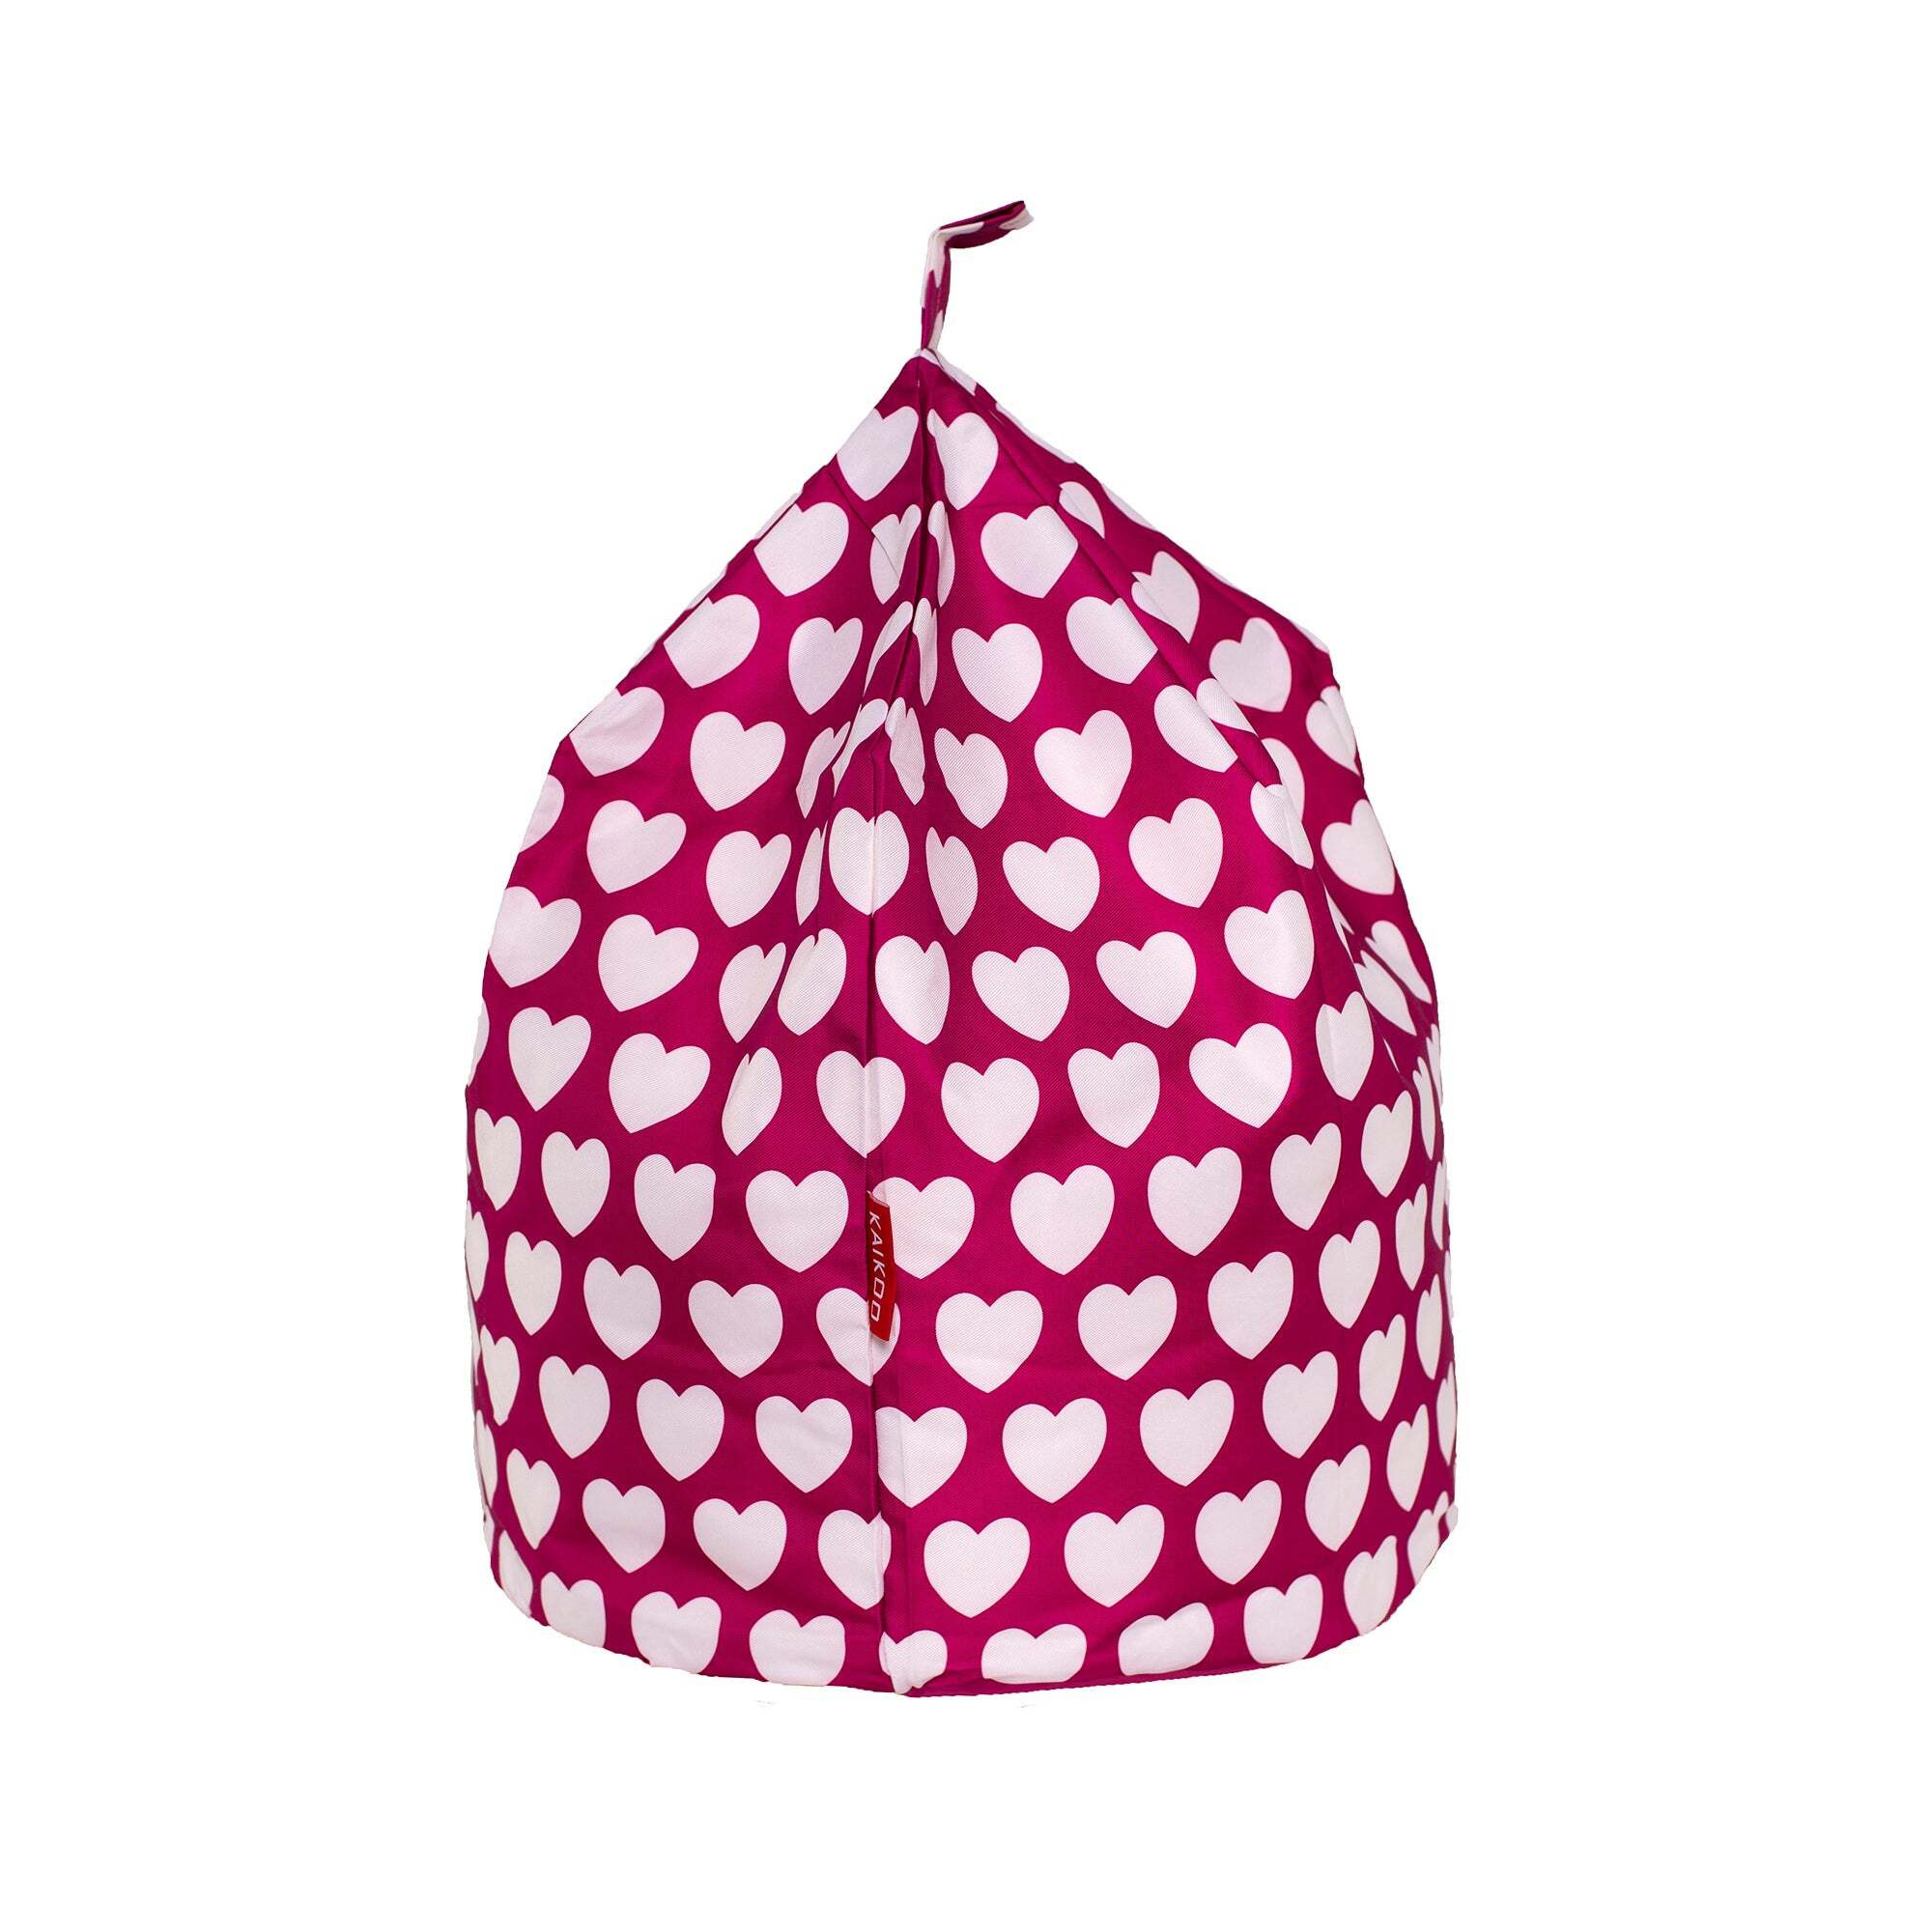 Pink Hearts Bean Bag Pink and White